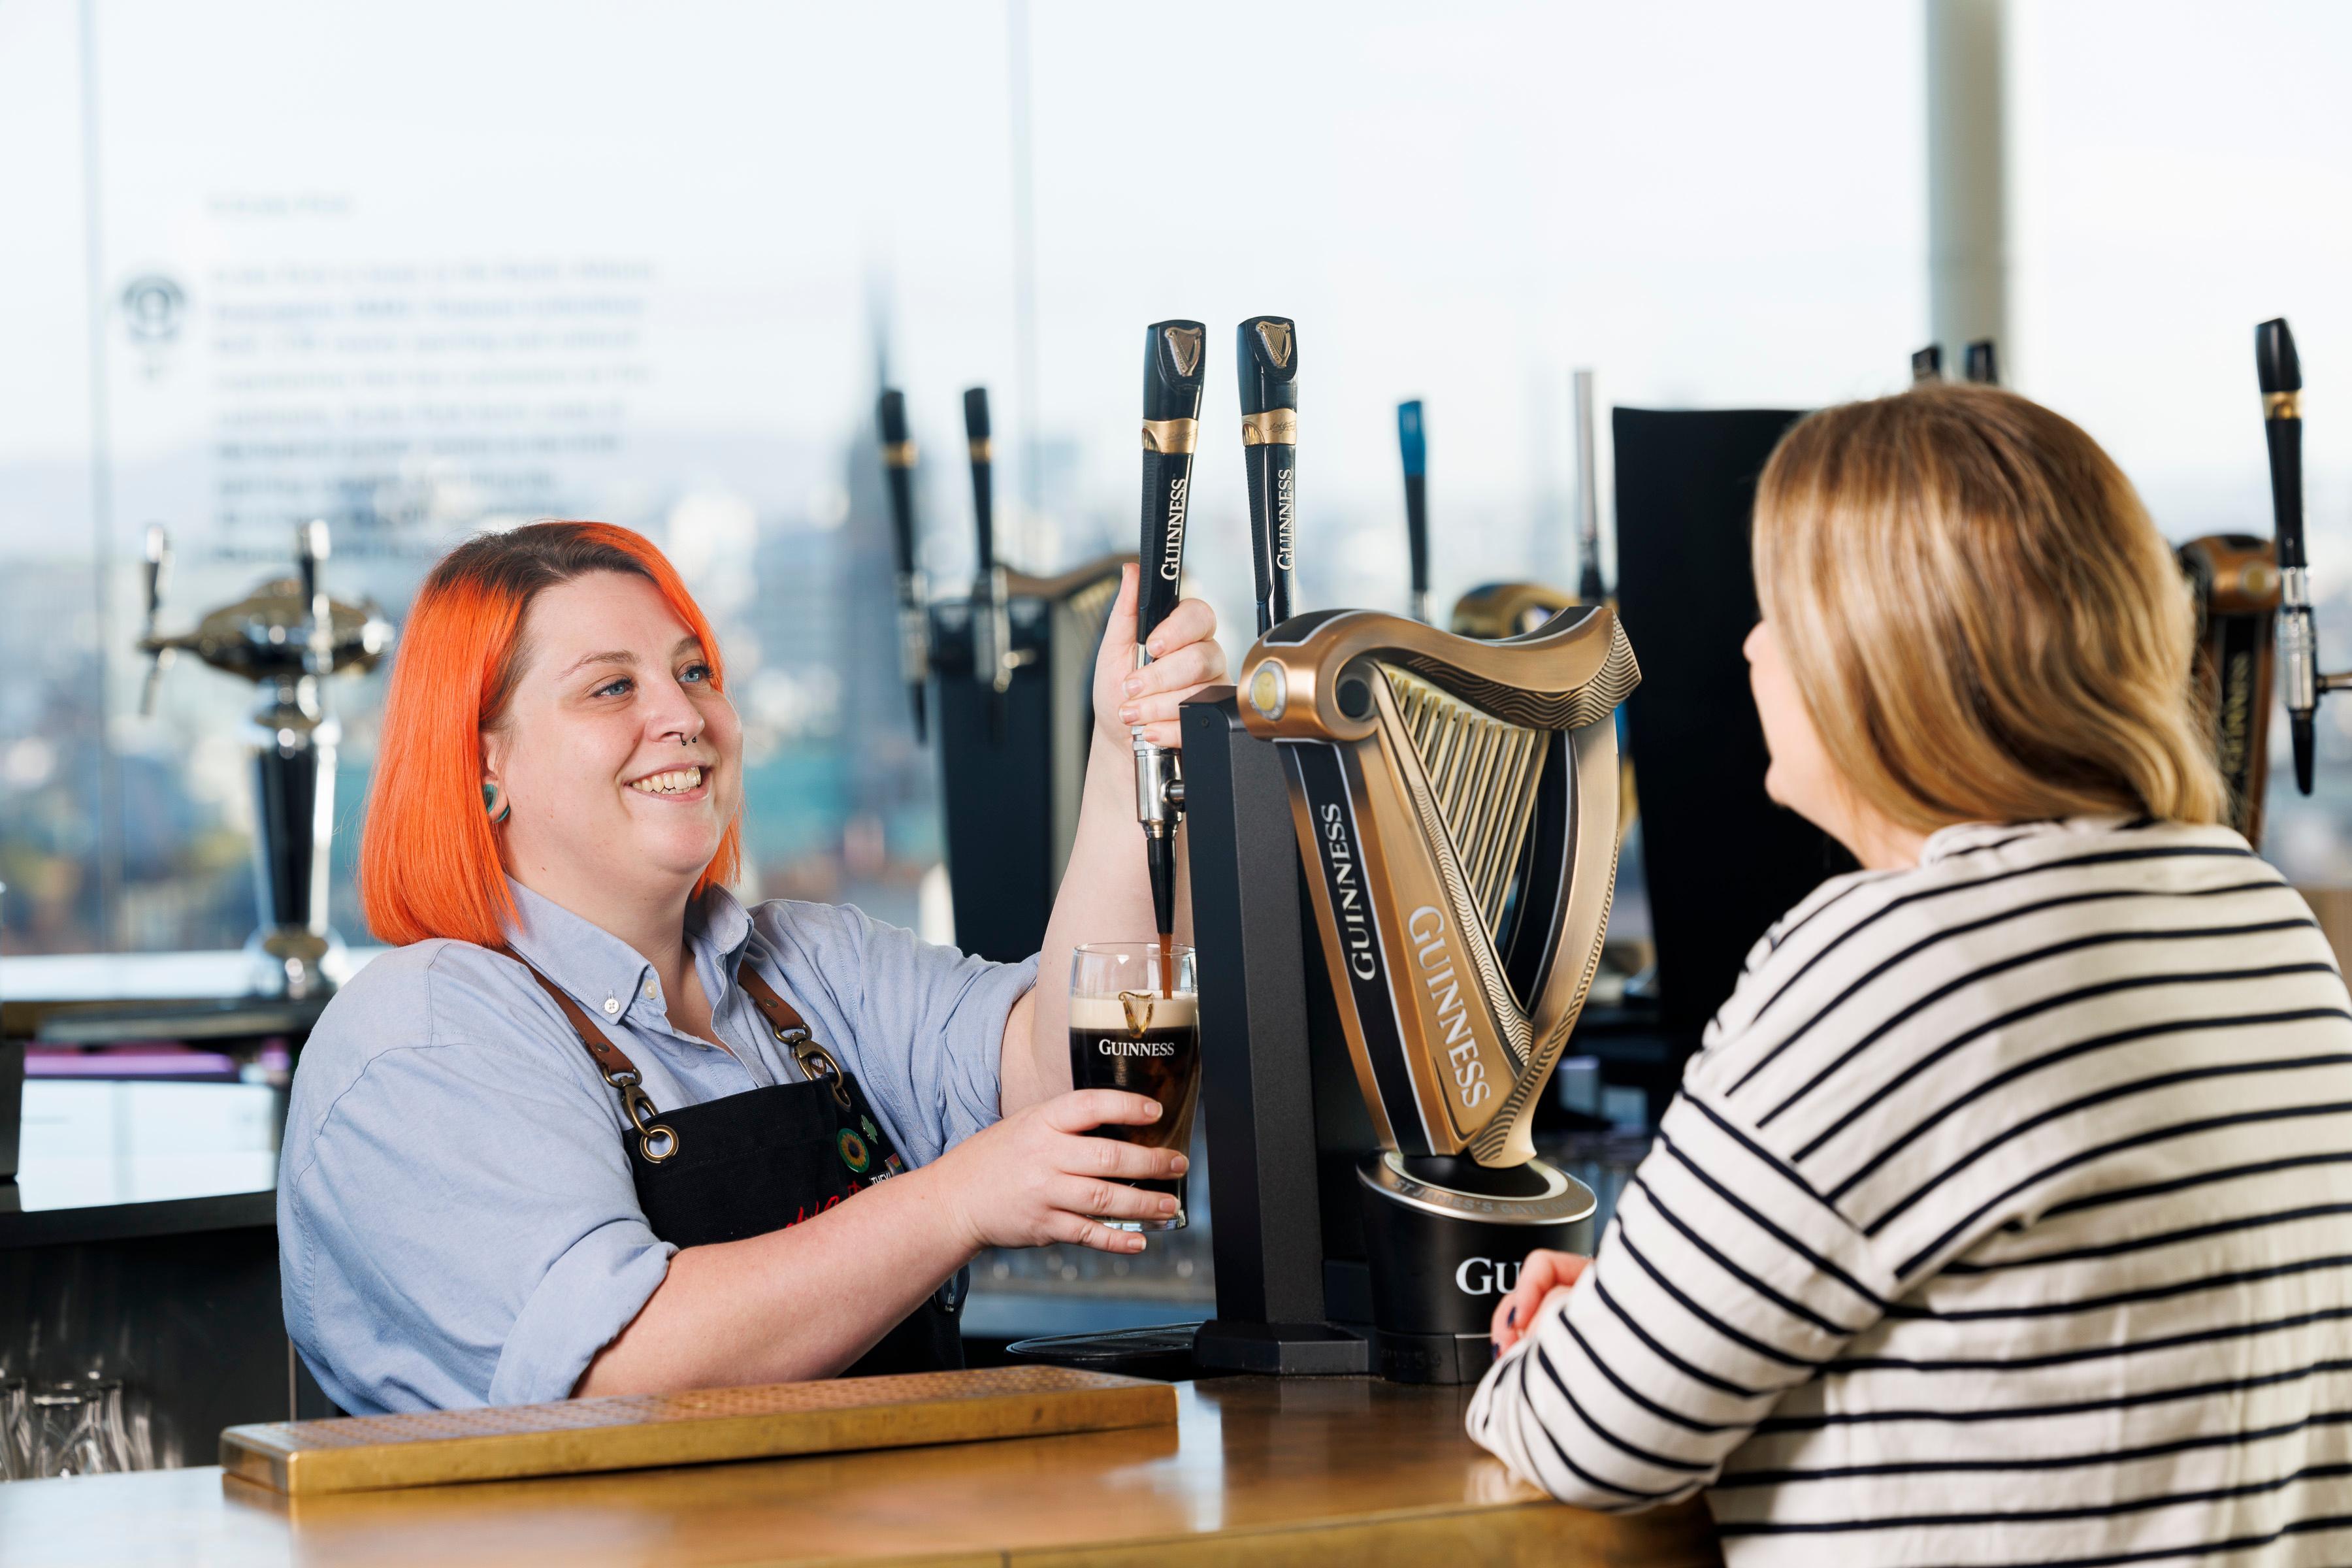 Woman with orange hair pouring a pint of Guiness behind a bar